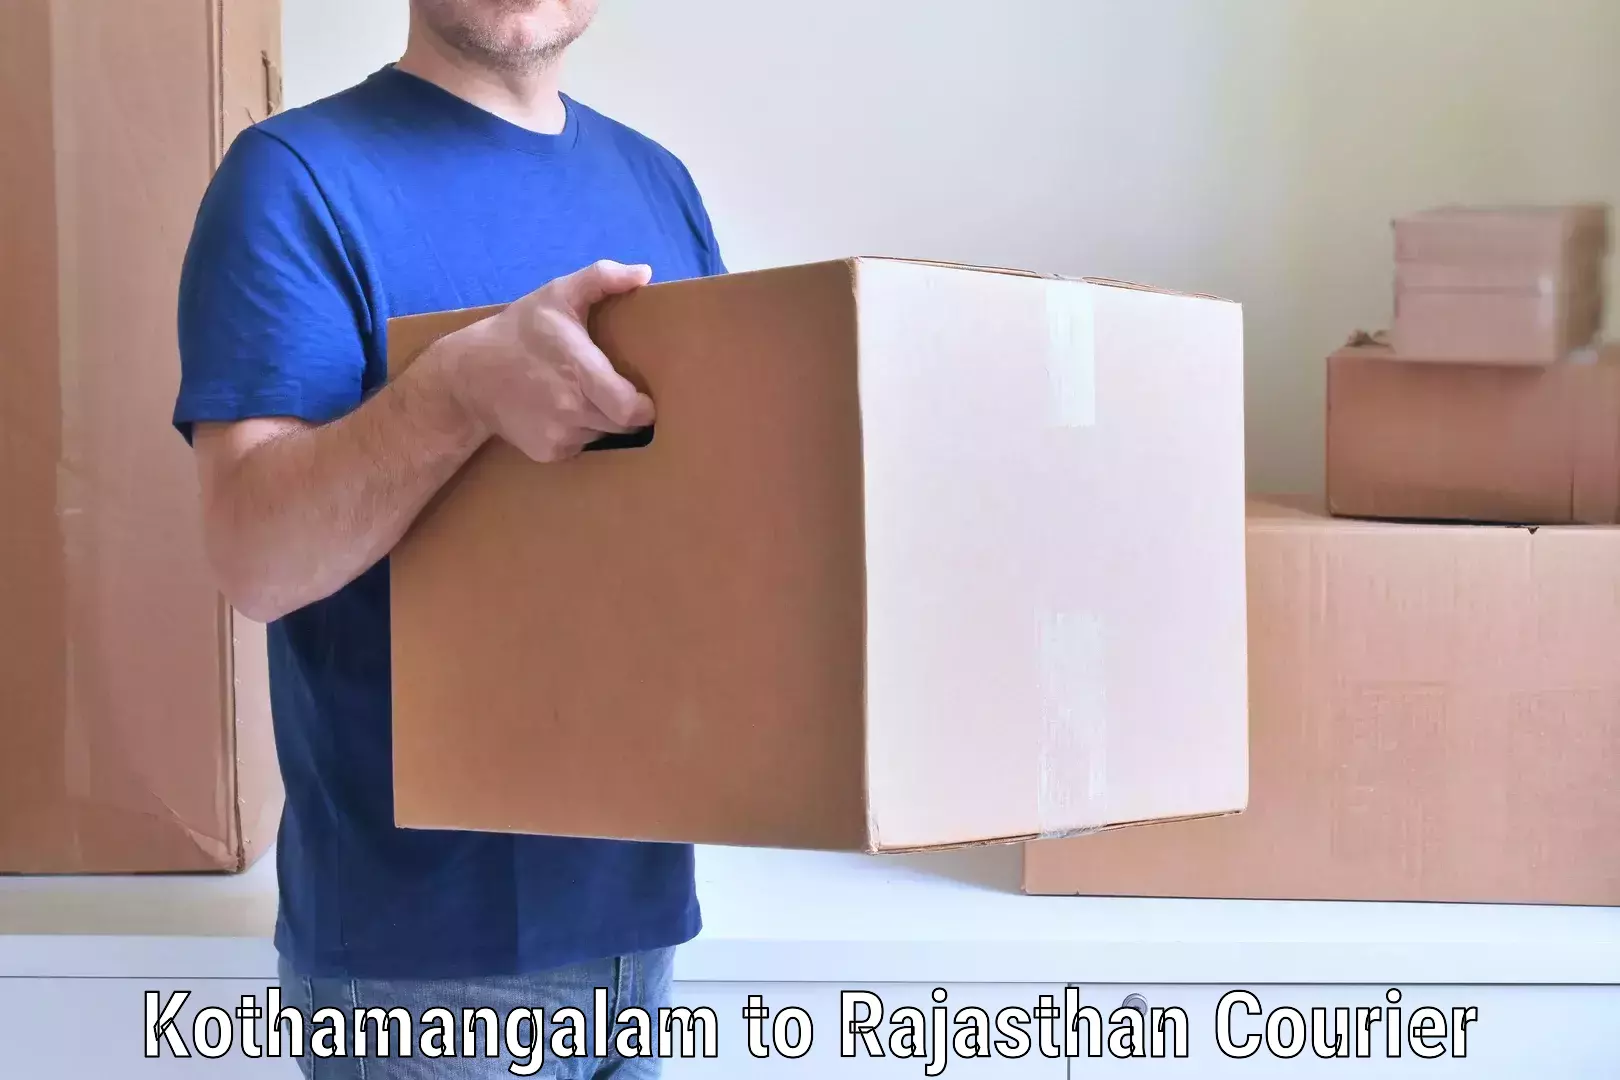 Door-to-door relocation services in Kothamangalam to Mathania